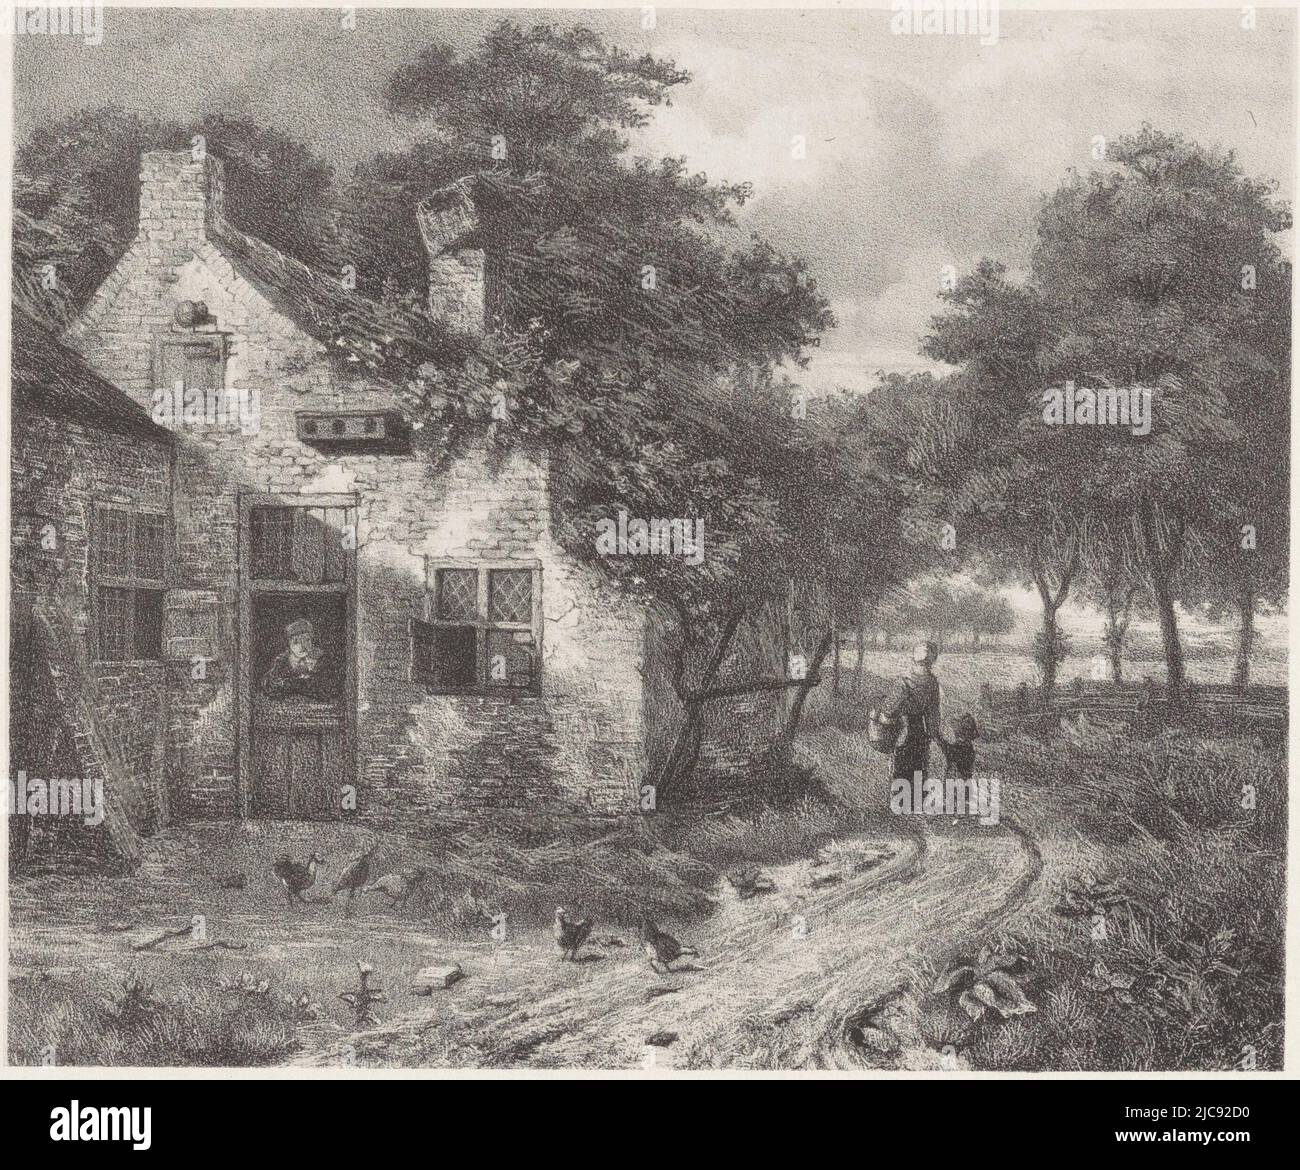 In the yard in front of the farmstead, chickens are scurrying. To the right, a mother and child walk away from the house. Farmhouse, print maker: Anthony Cornelis Cramer, (mentioned on object), after: Jan Wijnants, (mentioned on object), printer: Koninklijke Nederlandsche Steendrukkerij, (mentioned on object), print maker: Amsterdam, after: Netherlands, printer: The Hague, 1867 - 1874, paper, h 265 mm × w 350 mm Stock Photo